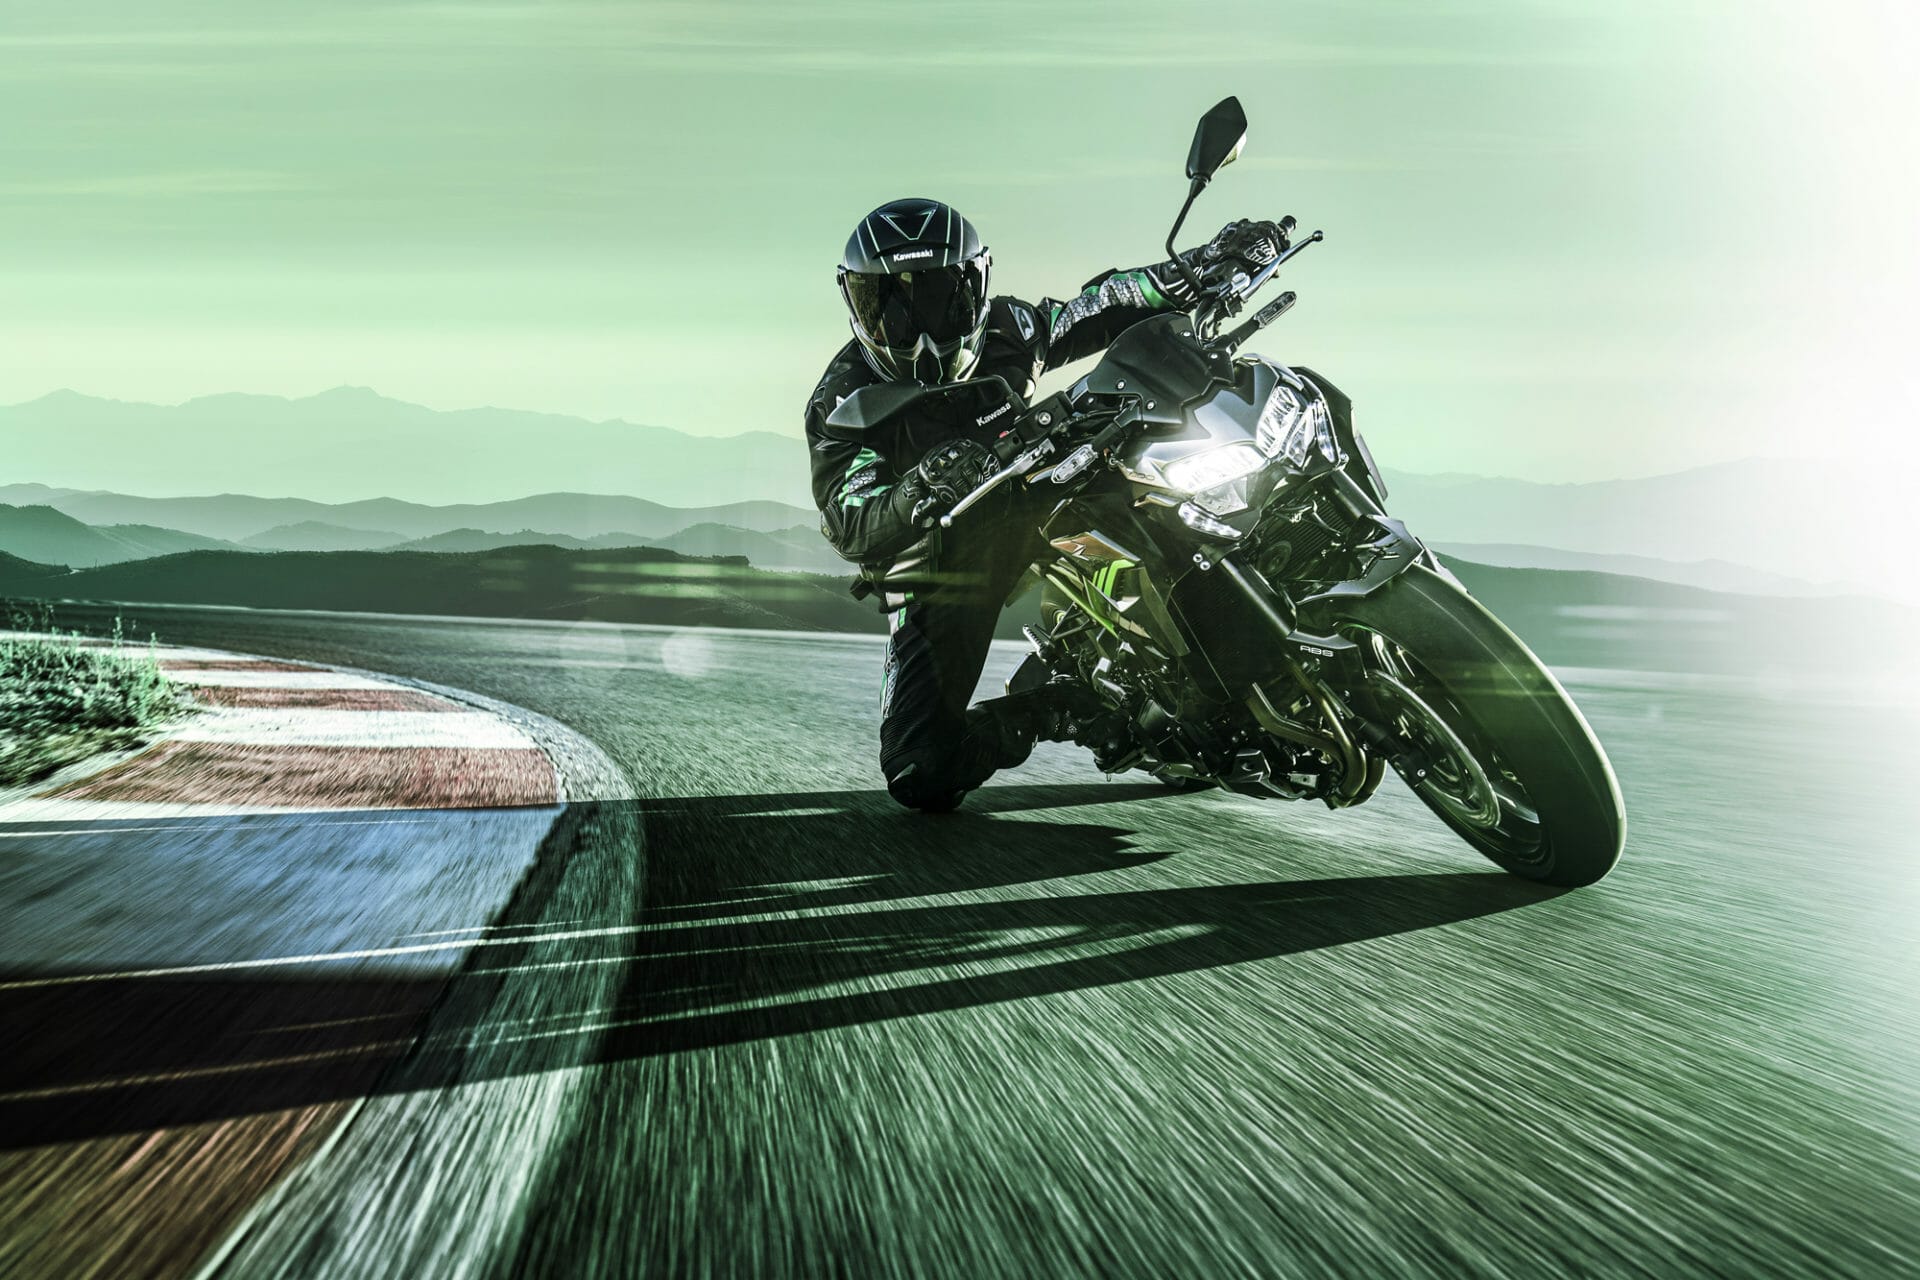 #Kawasaki Updates for #Z900 and #Z650
- also in the app Motorcycle News